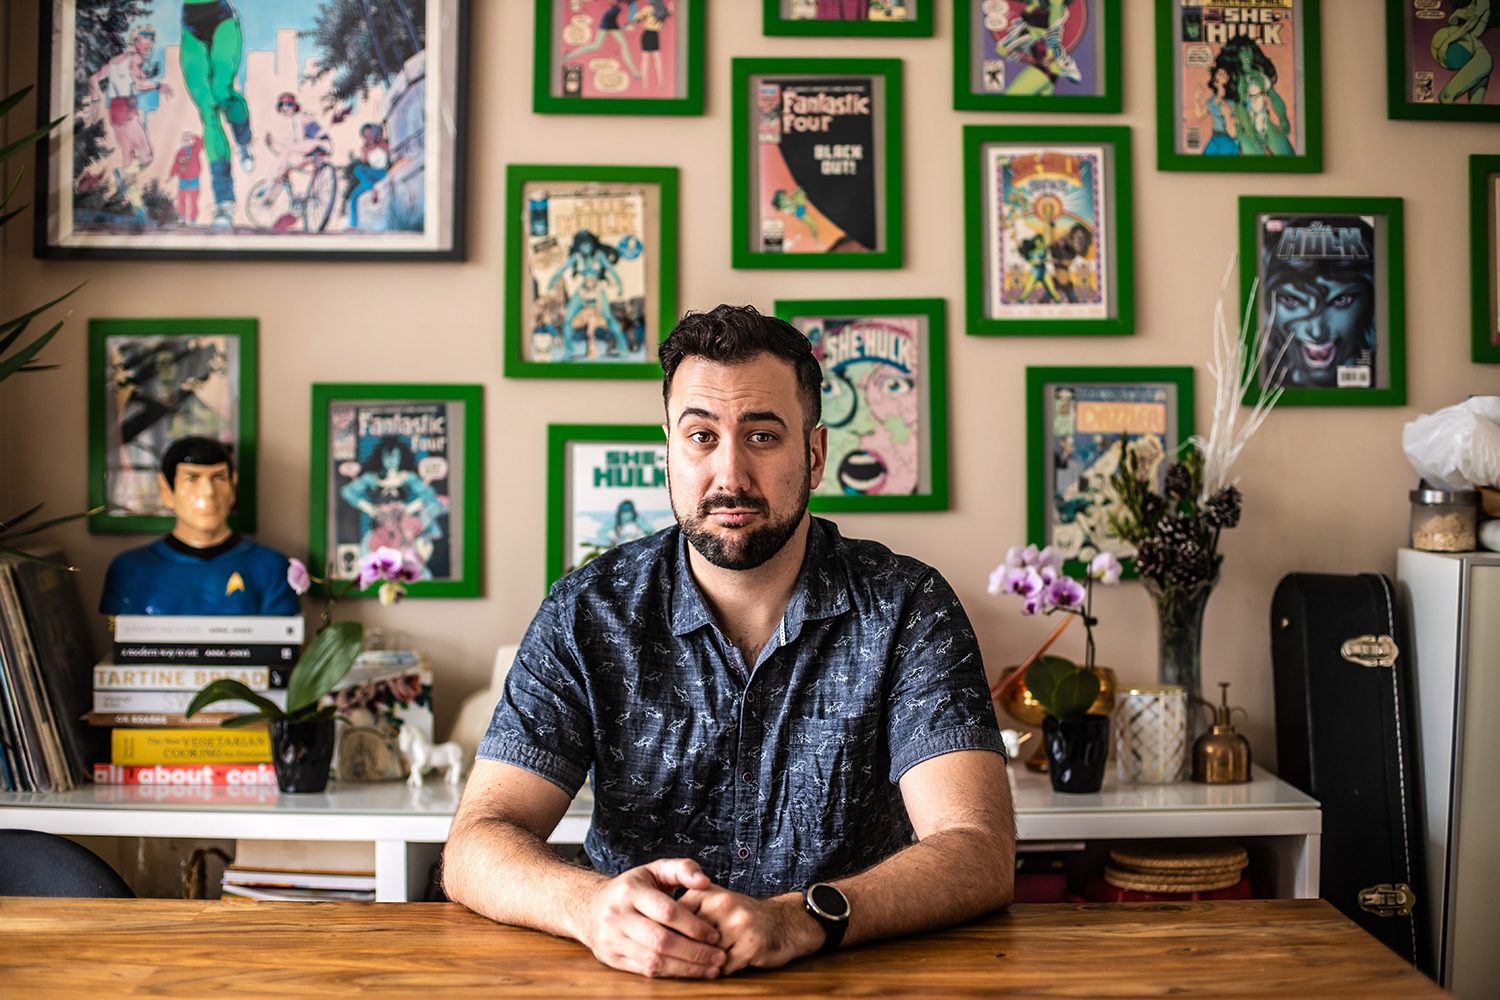 Writer and U of T grad Aaron Hagey-Mackay sits at a desk in his home. On the wall behind him hang many framed comic book covers.